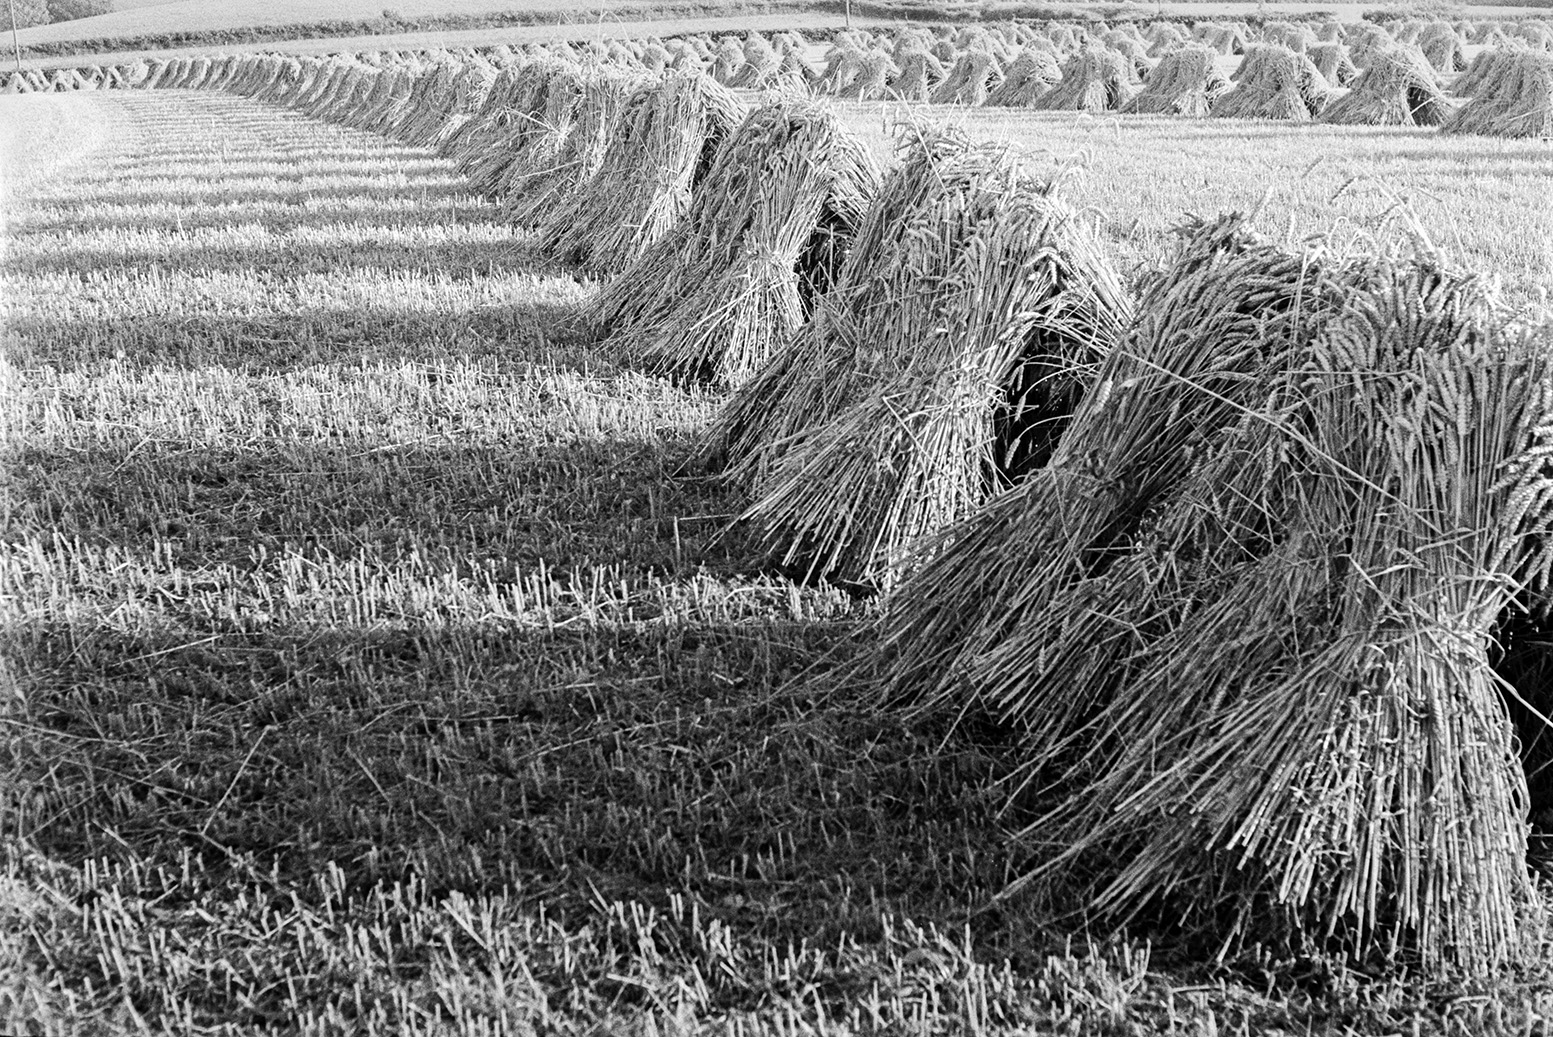 Stooks of corn or wheat in a field at Mill Road Farm, Beaford. The farm was also known as Jeffrys.